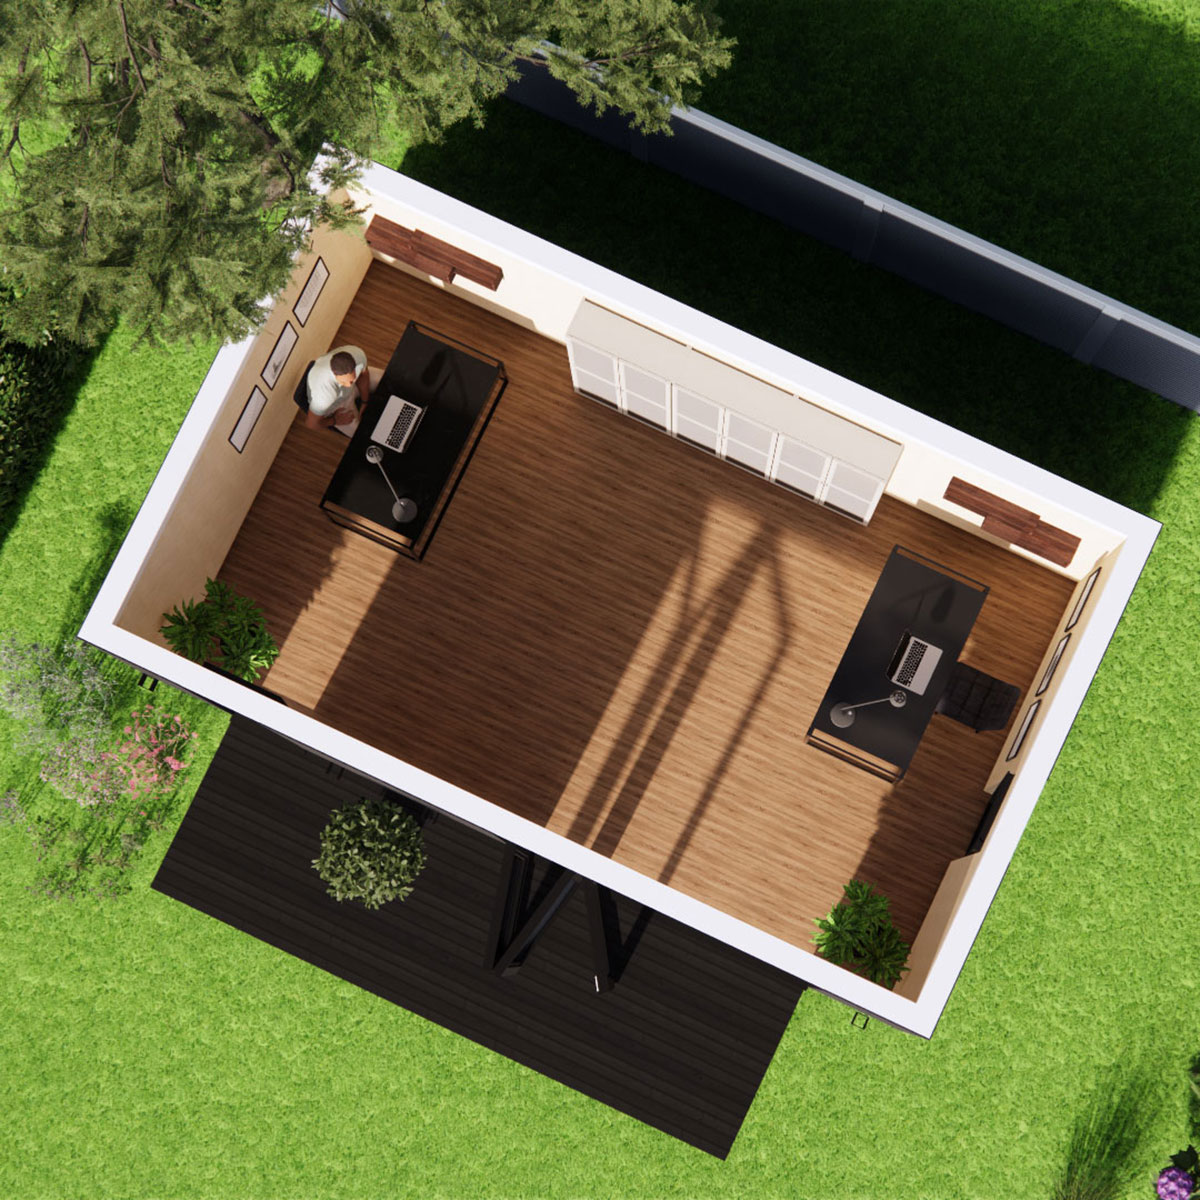 Interior layout of 3.6 by 6.2 garden room